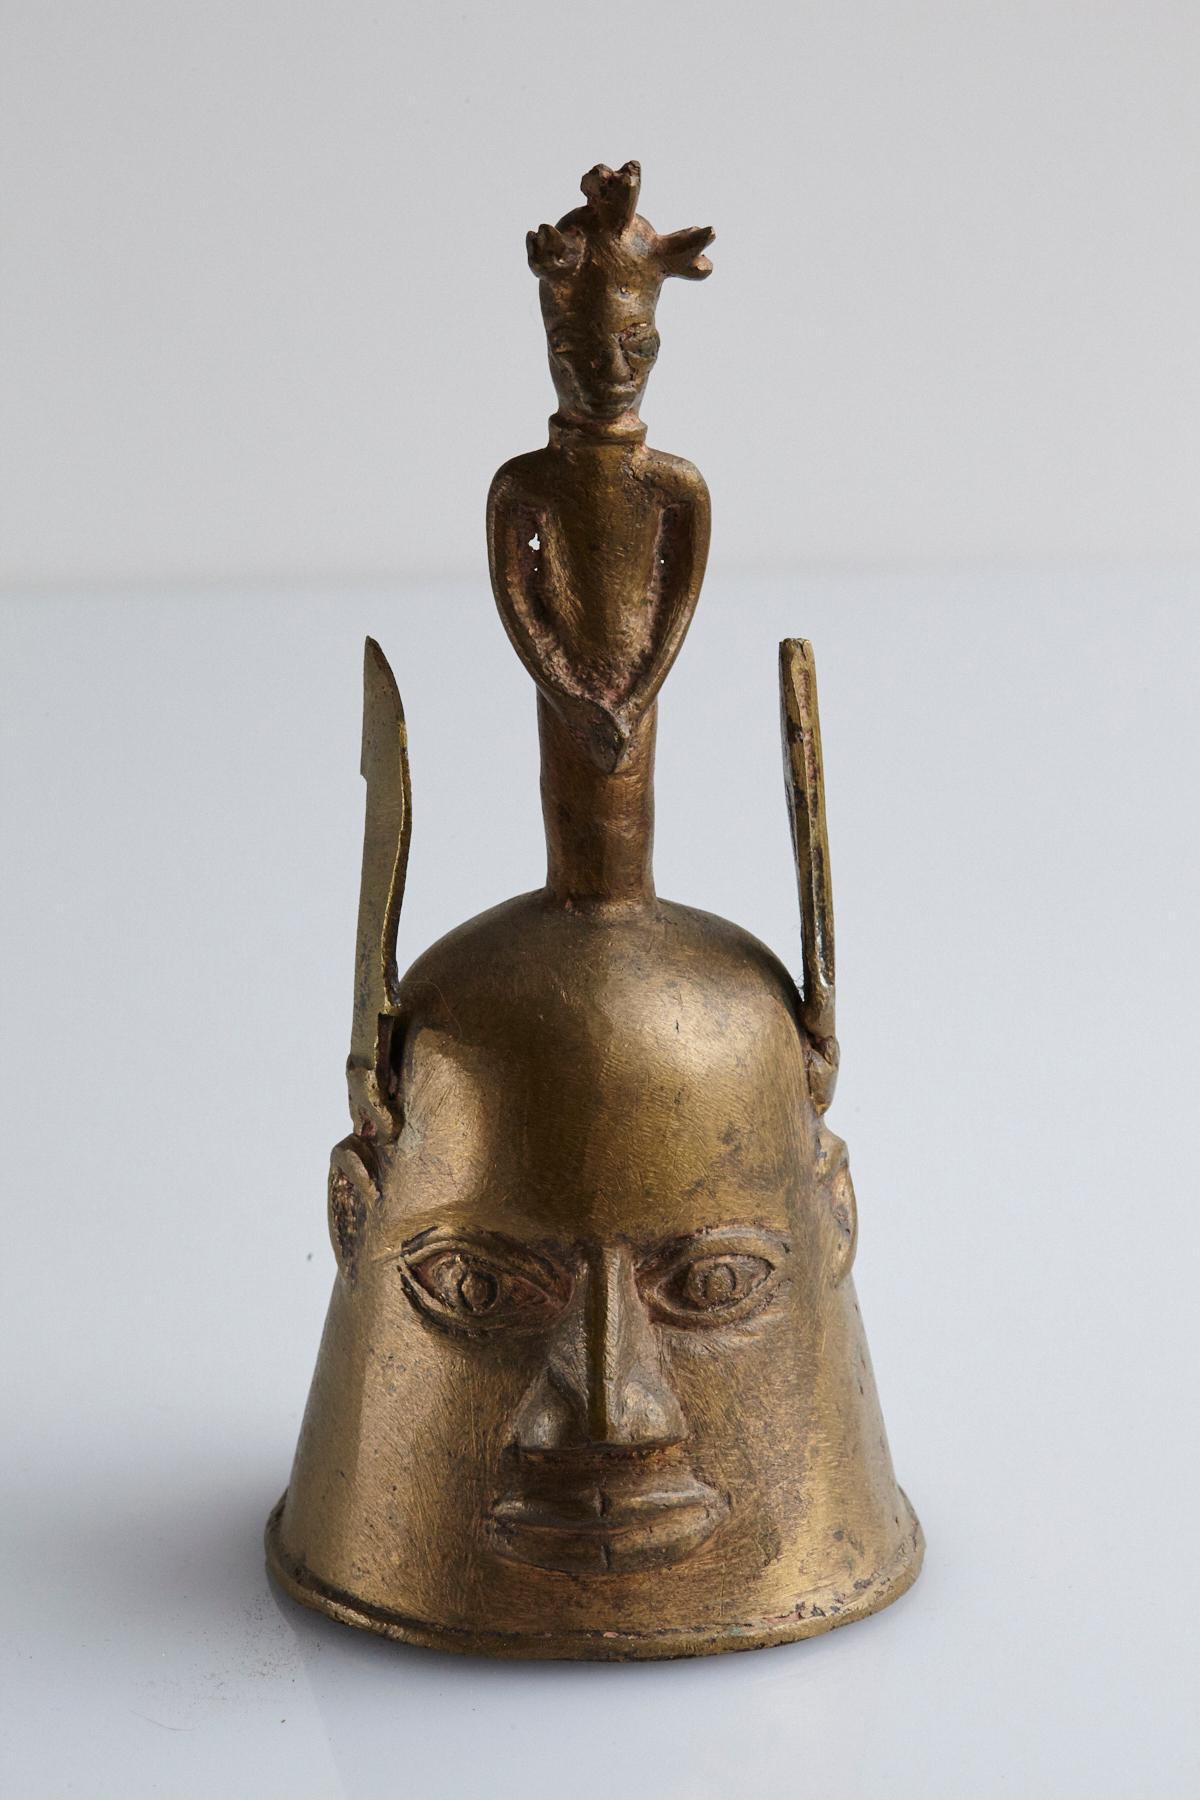 Yoruba Bell surmounted with a handle, made for the Ogboni society was used in rituals, possible to make connections with their ancestors. The Ogboni Society is a fraternal institution indigenous to the Oruba language-speaking polities of Nigeria,